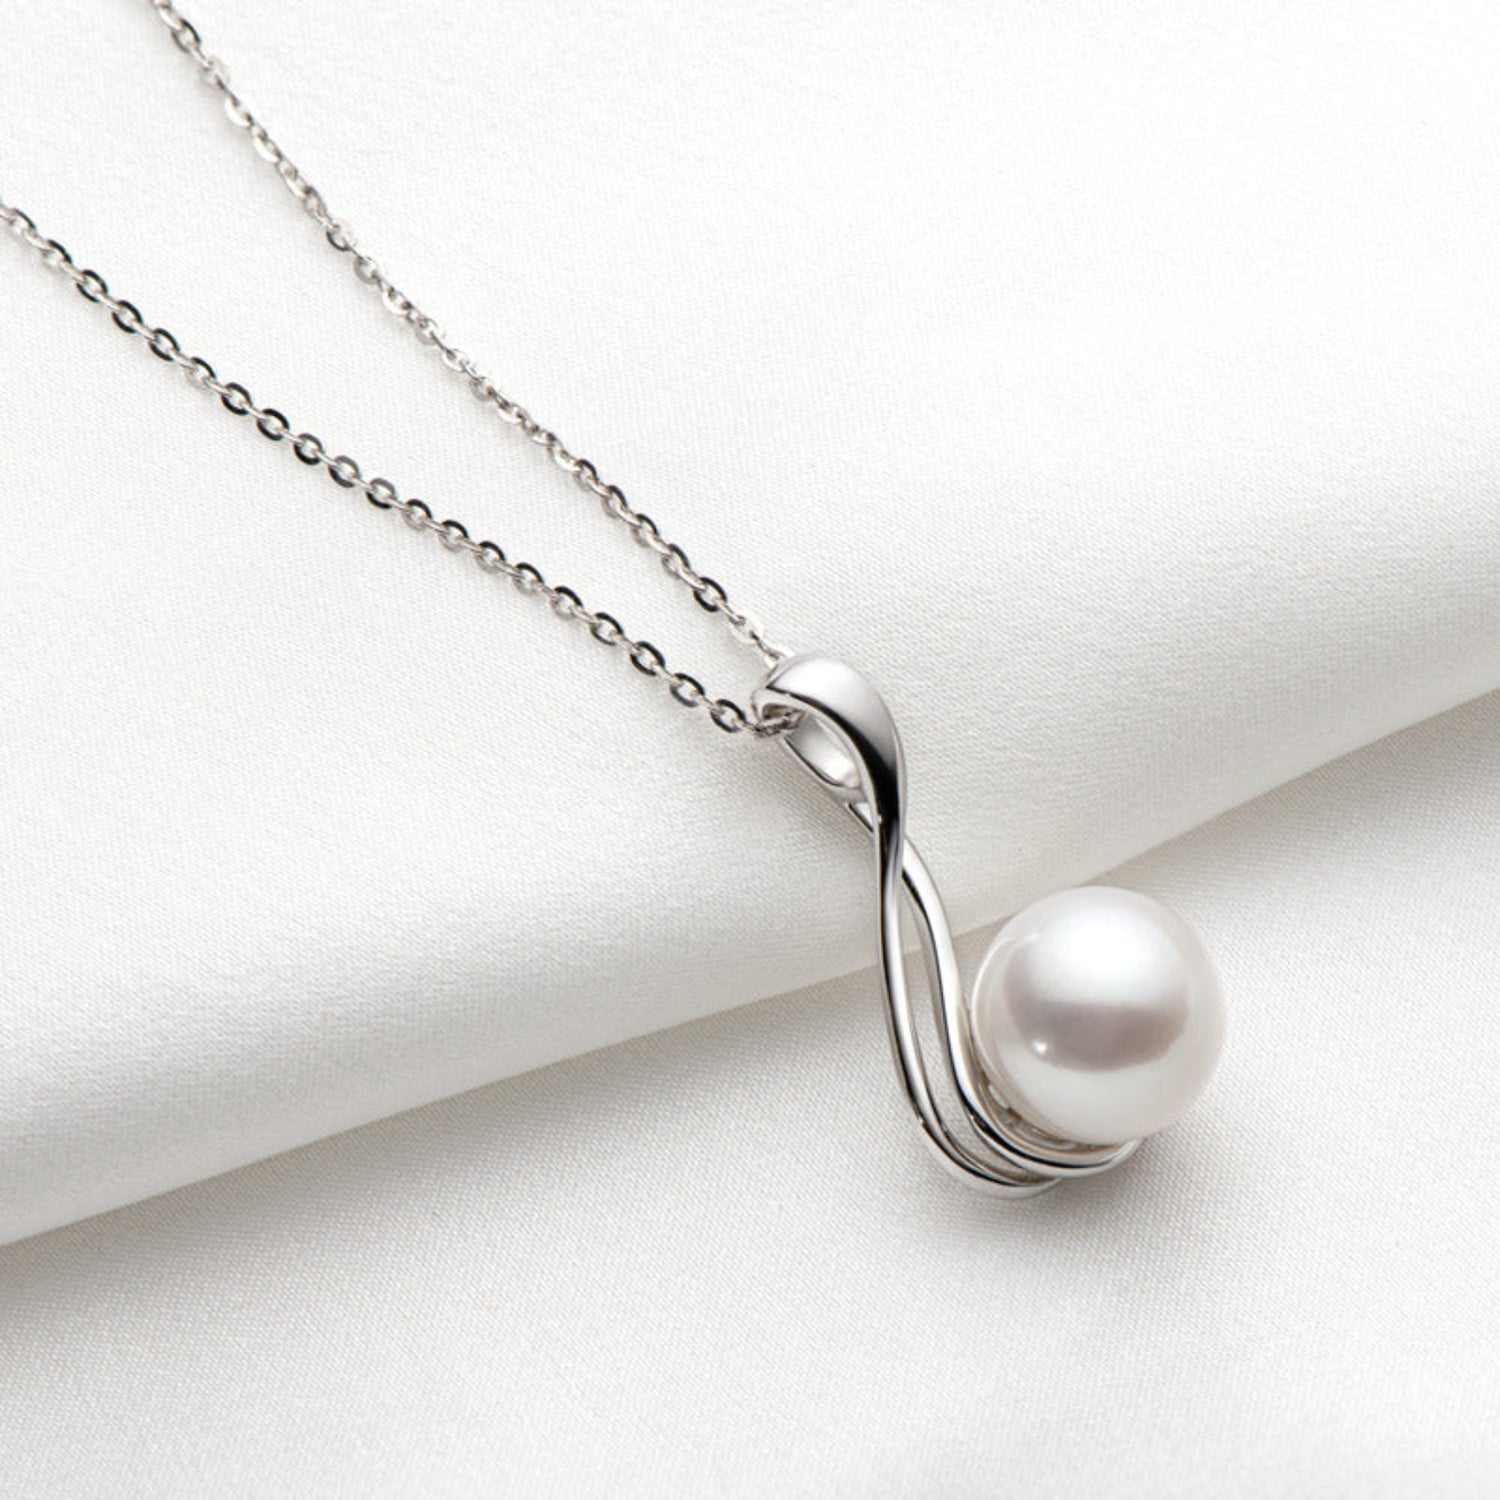 10mm Freshwater Pearl Pendant Necklace in S925 Silver